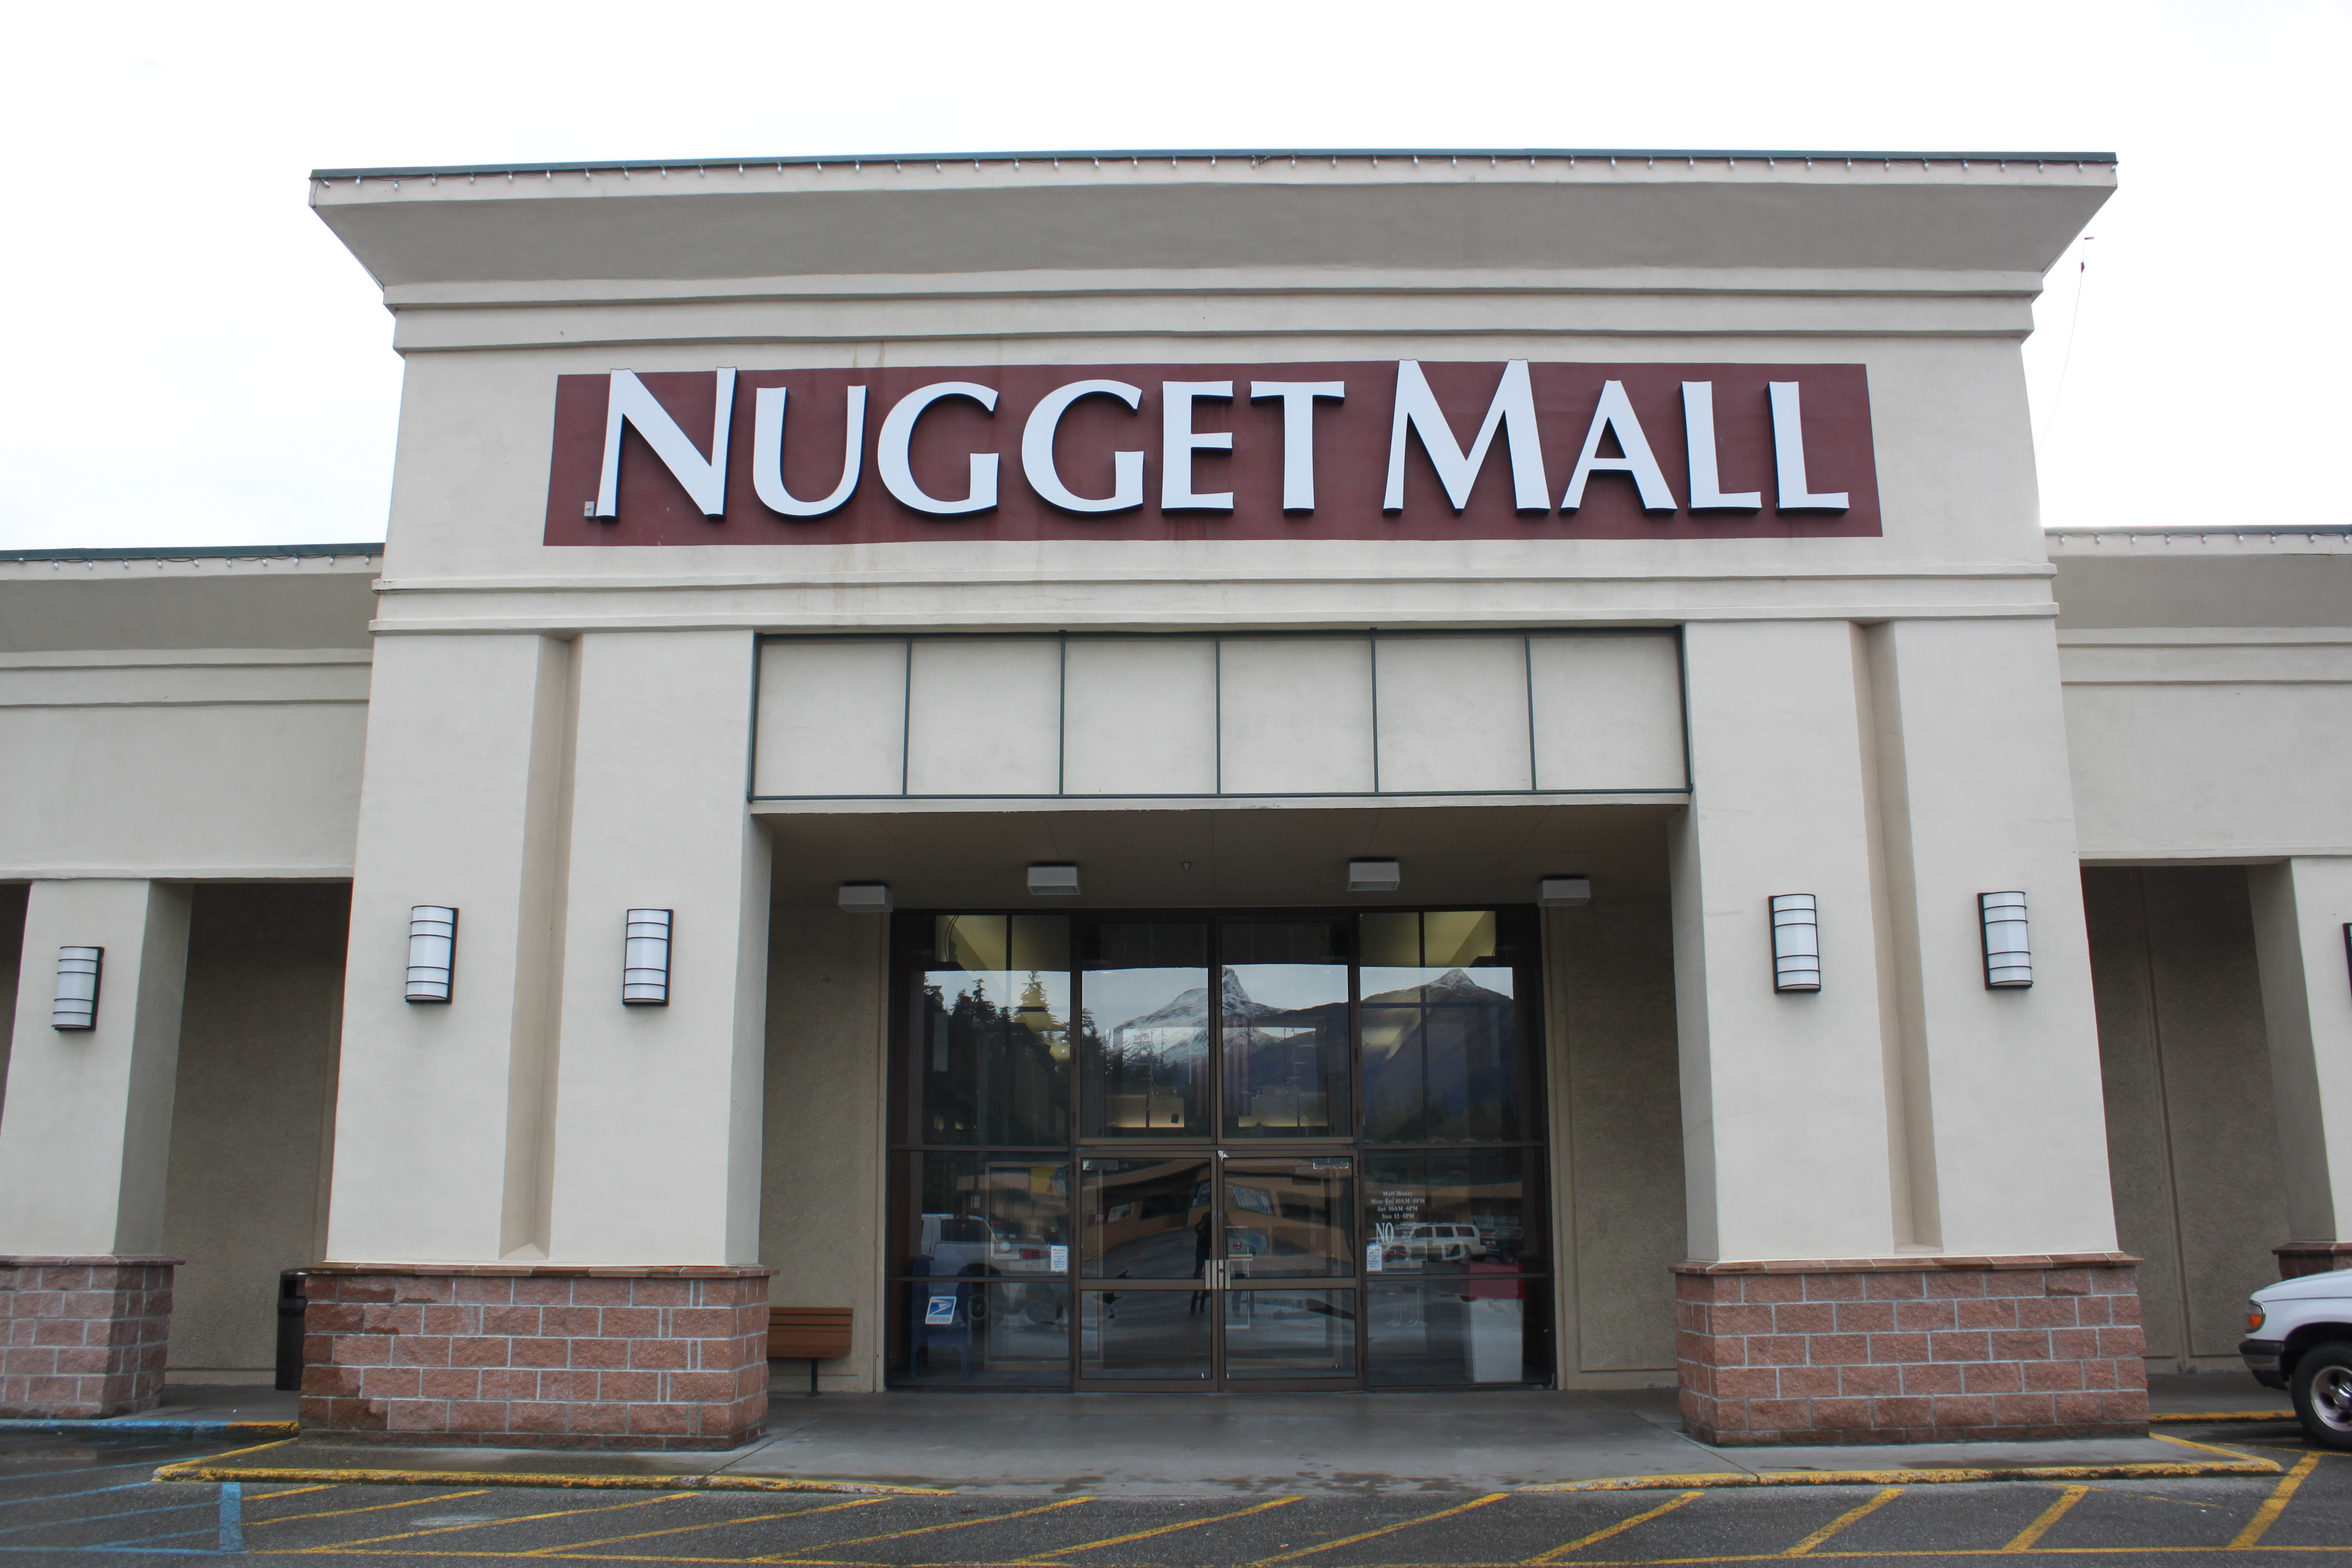 Nugget Mall is becoming a "ghost town" with all the vacant stores. (Photo by Lisa Phu/KTOO)